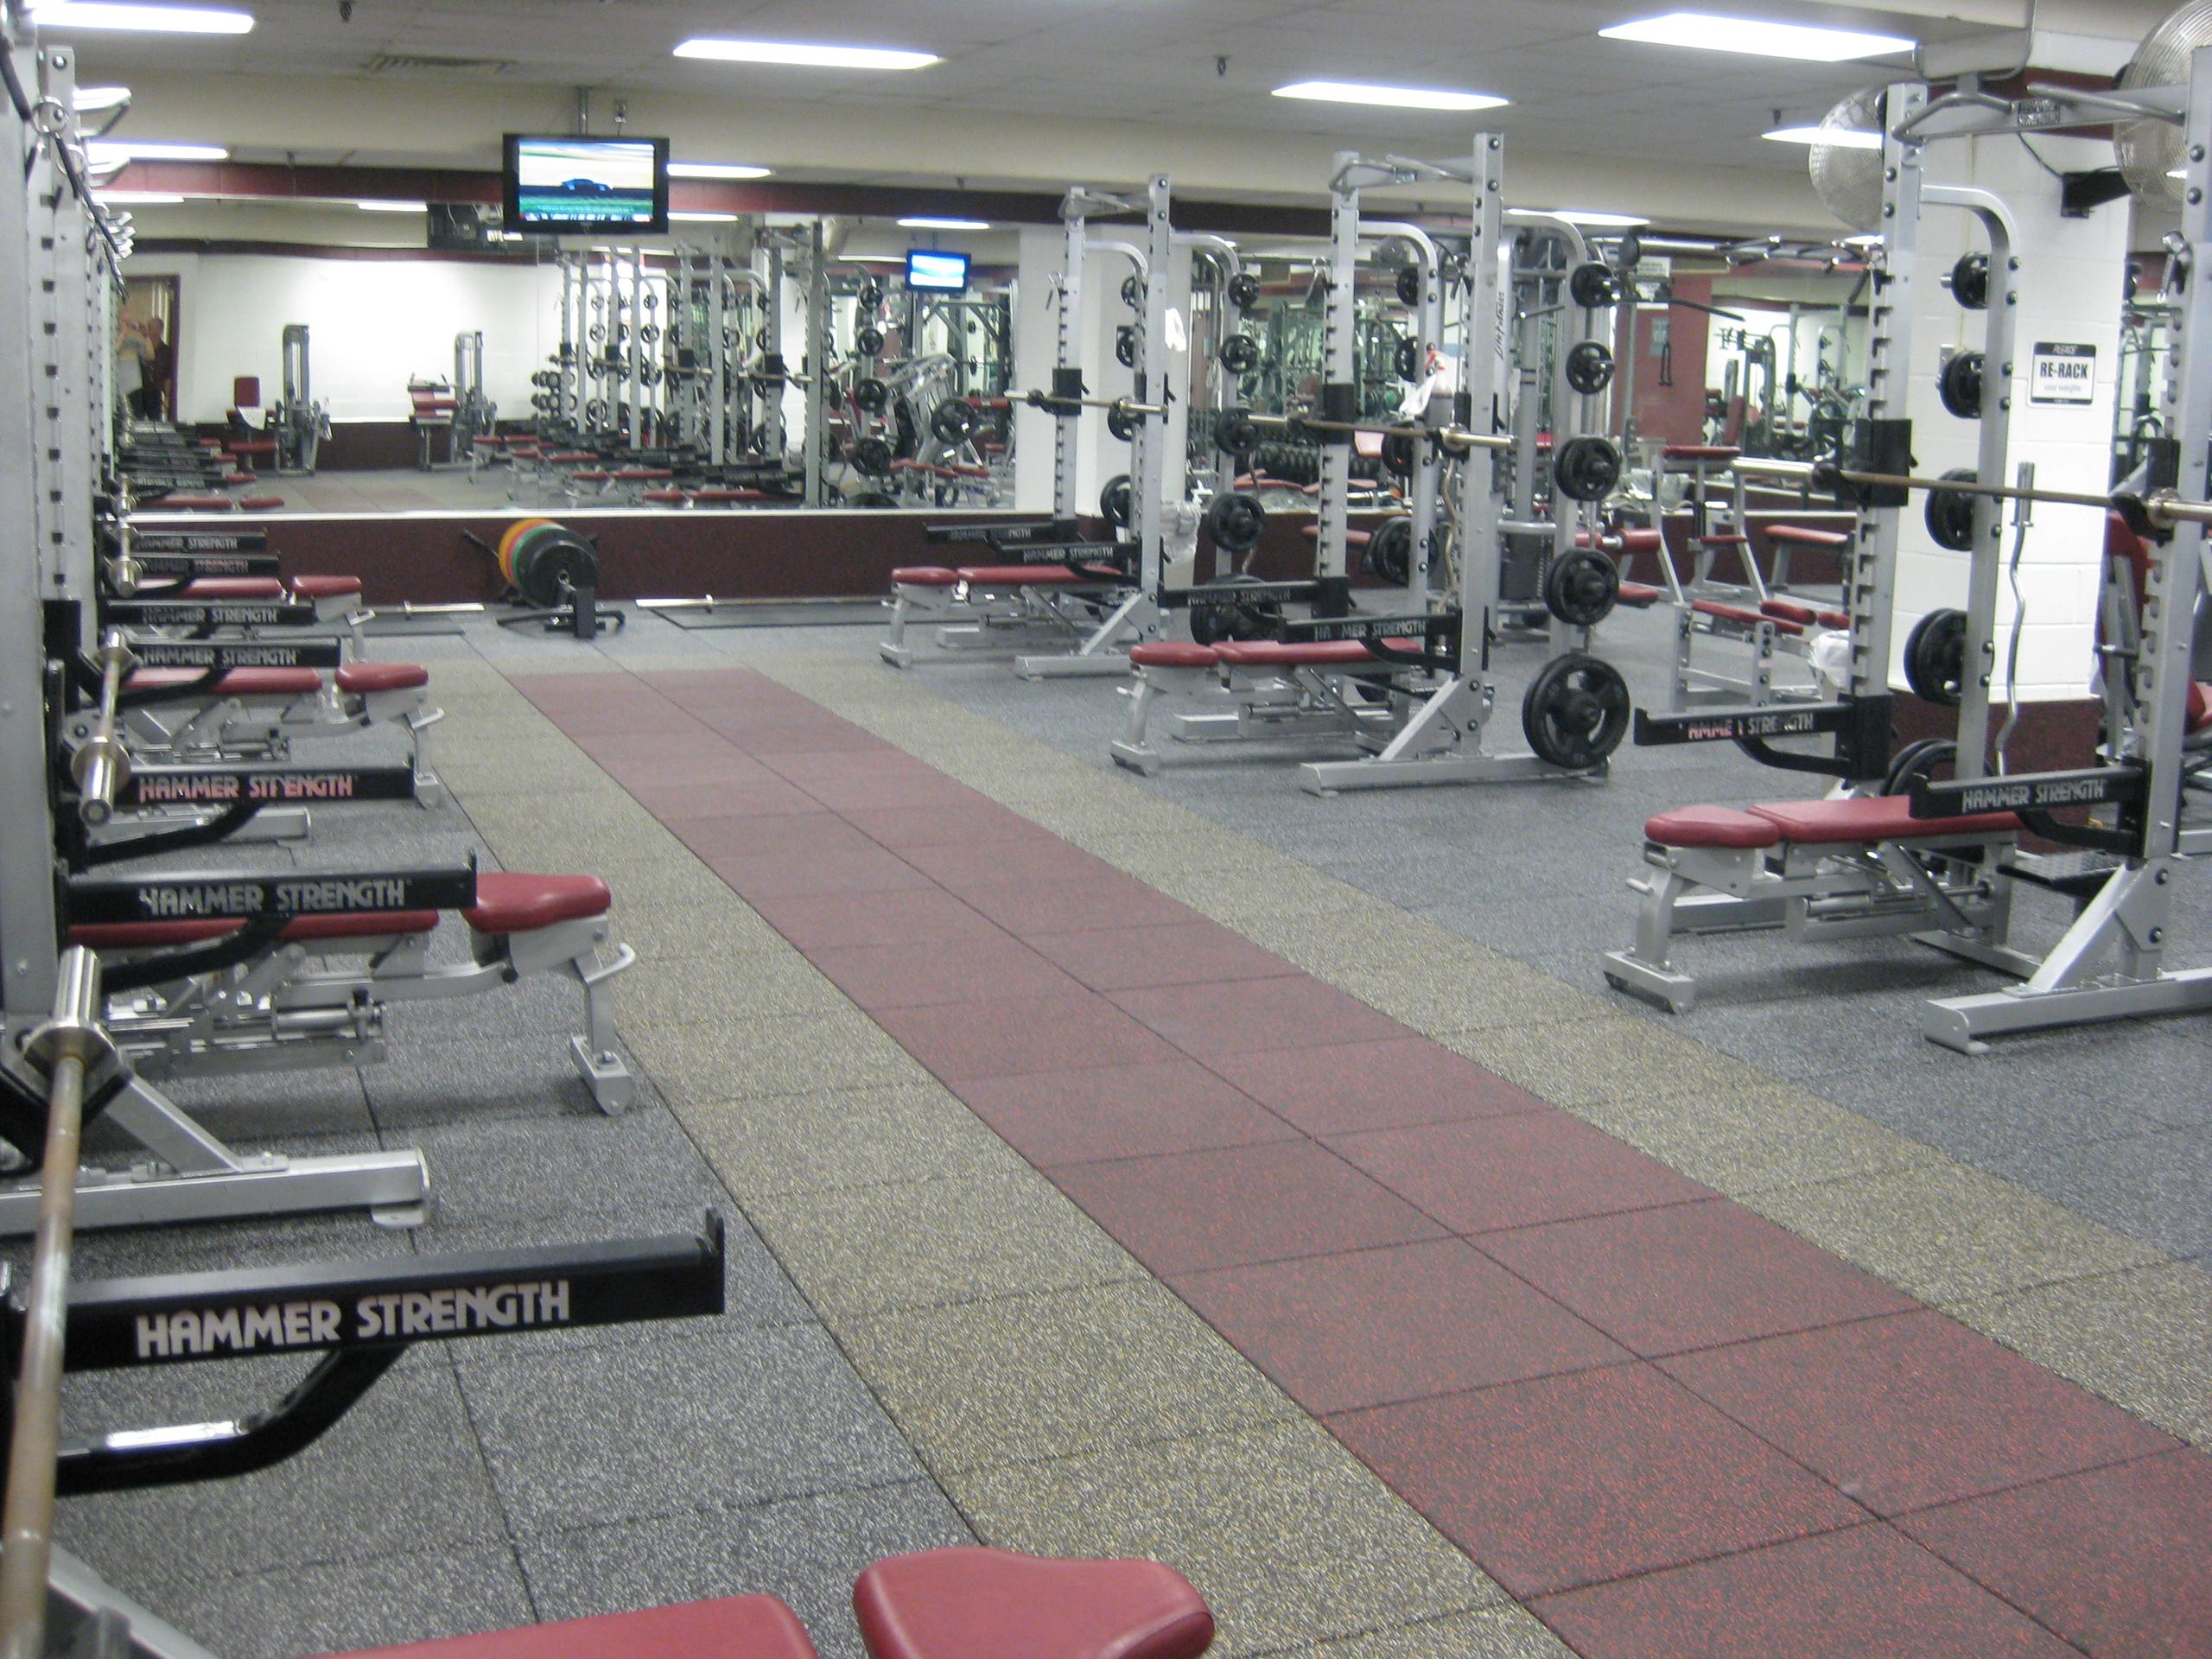 Maggs Weight Room